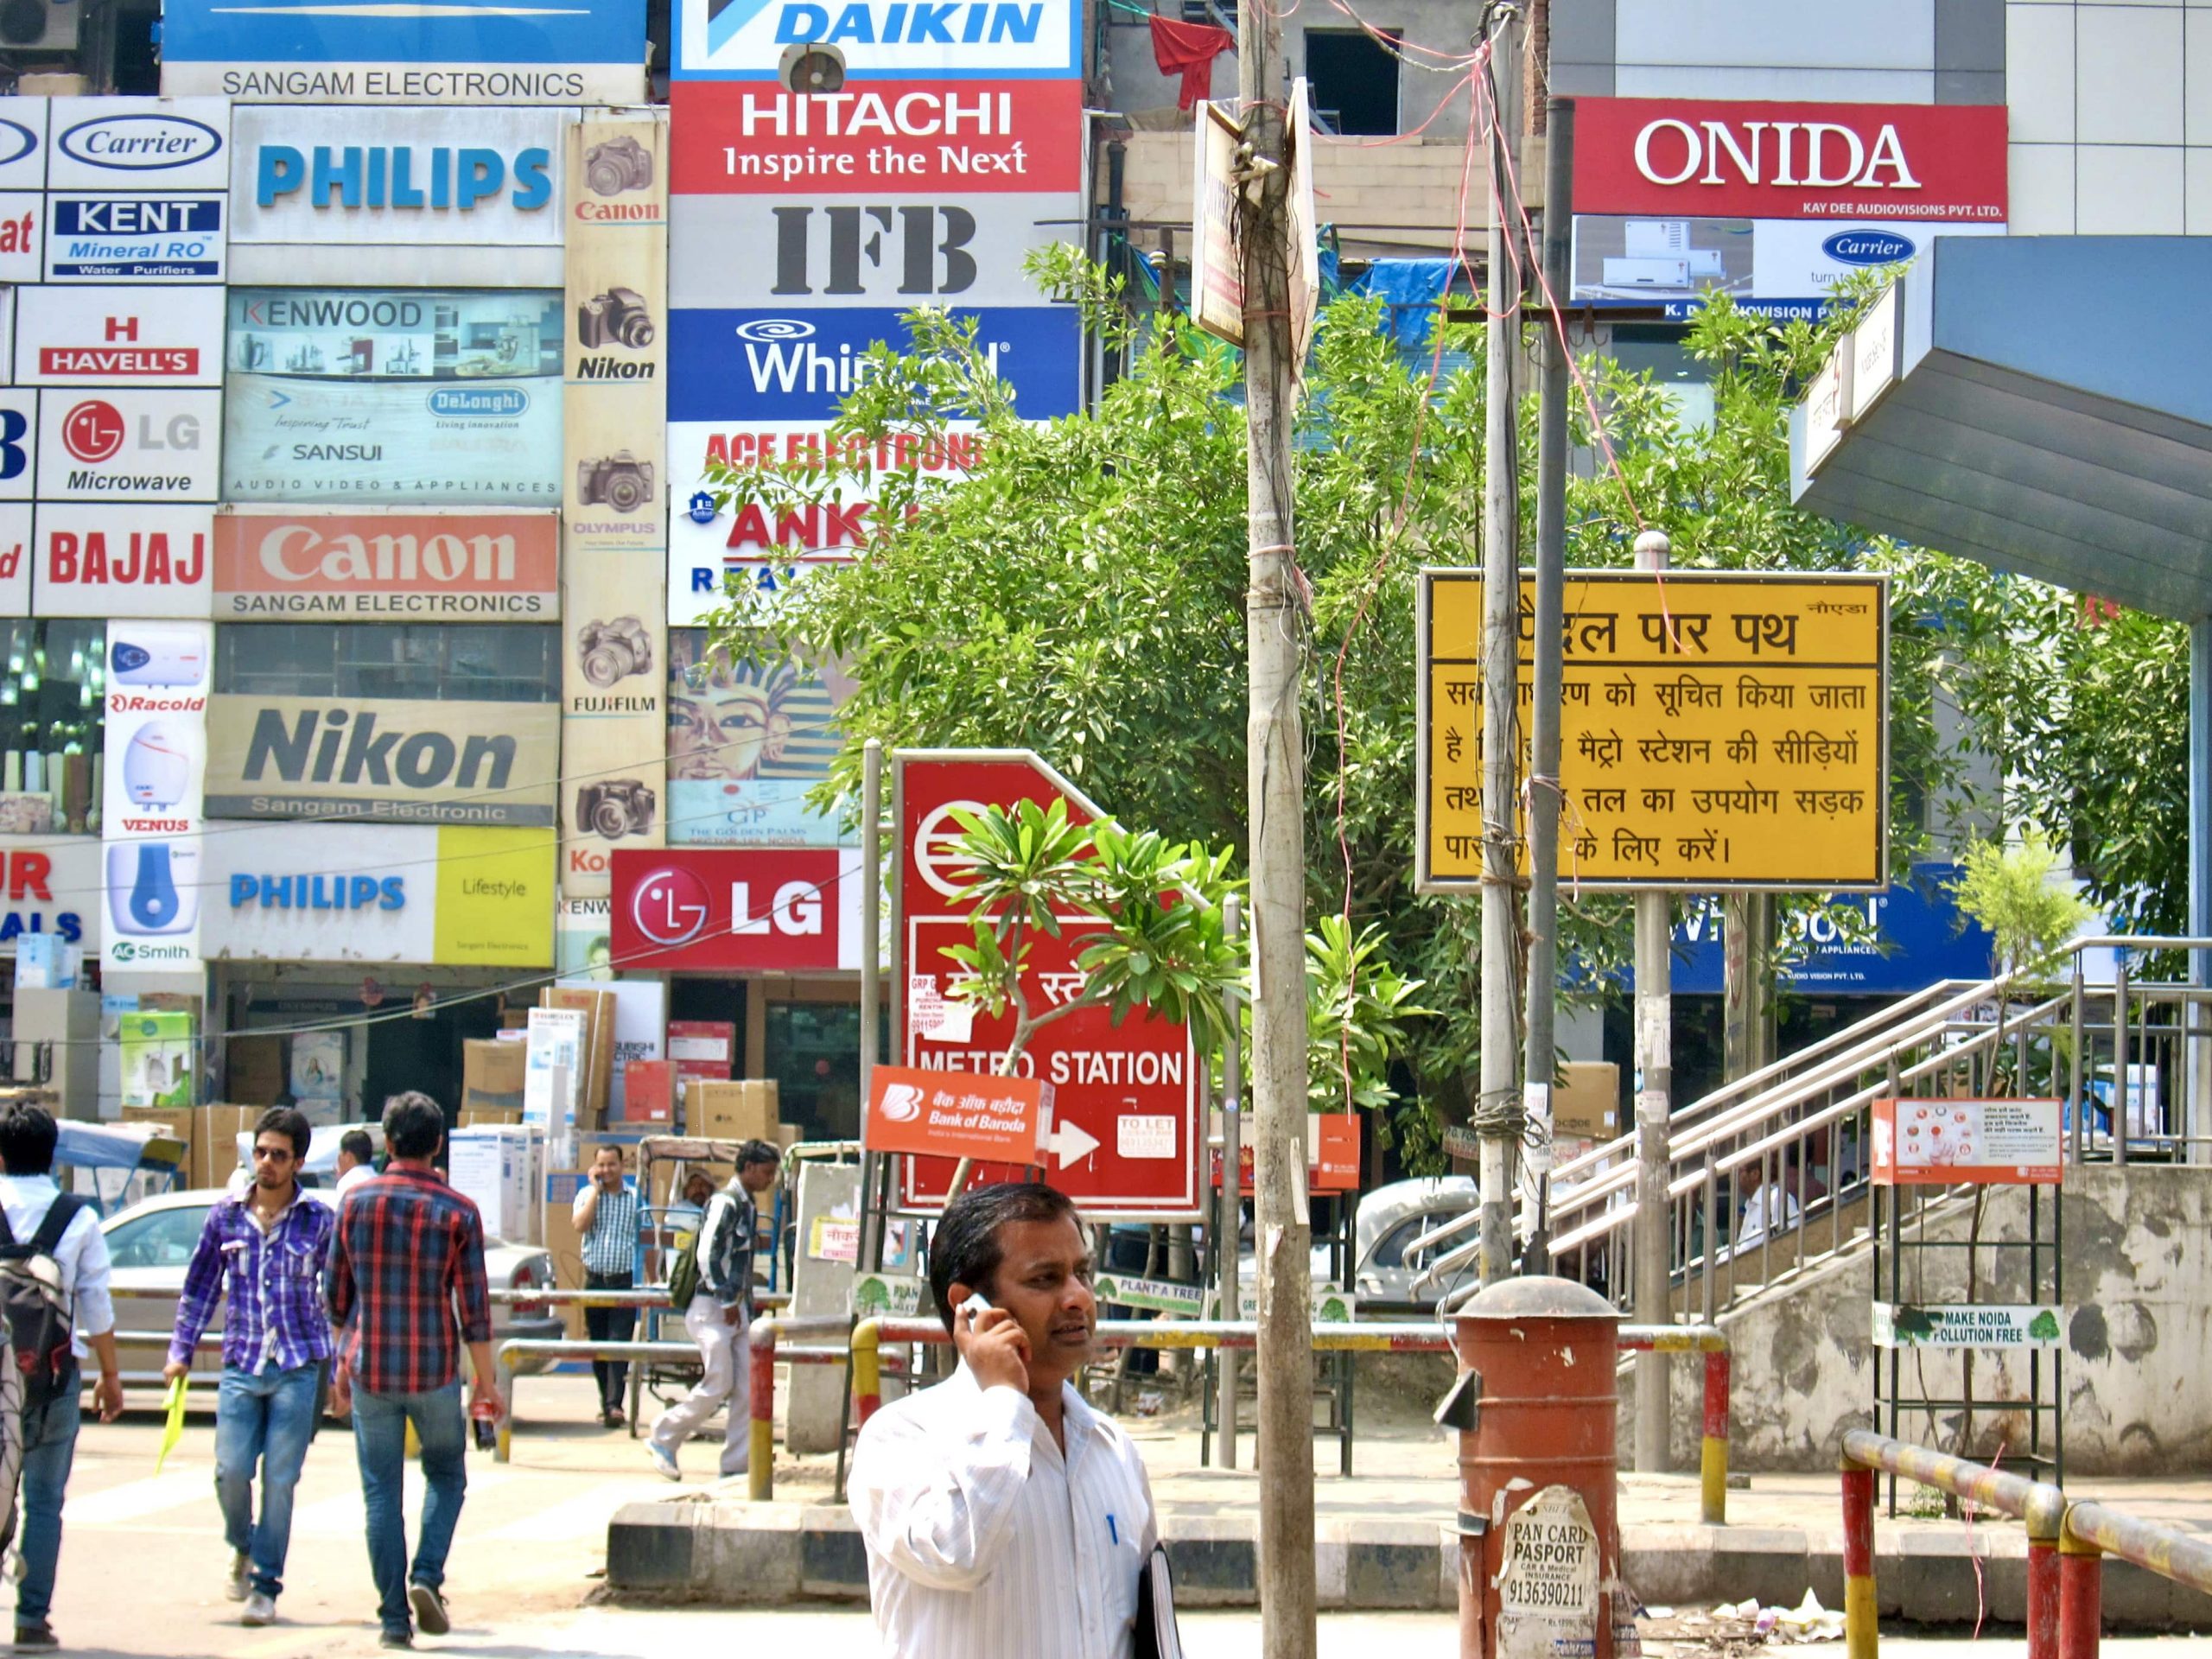 Man in foreground on mobile phone on a busy street in India, with backdrop of signs with Japanese, Korean, and US logos and brands brands like LG, Nikon, Canon, Whirlpool, and Hitachi